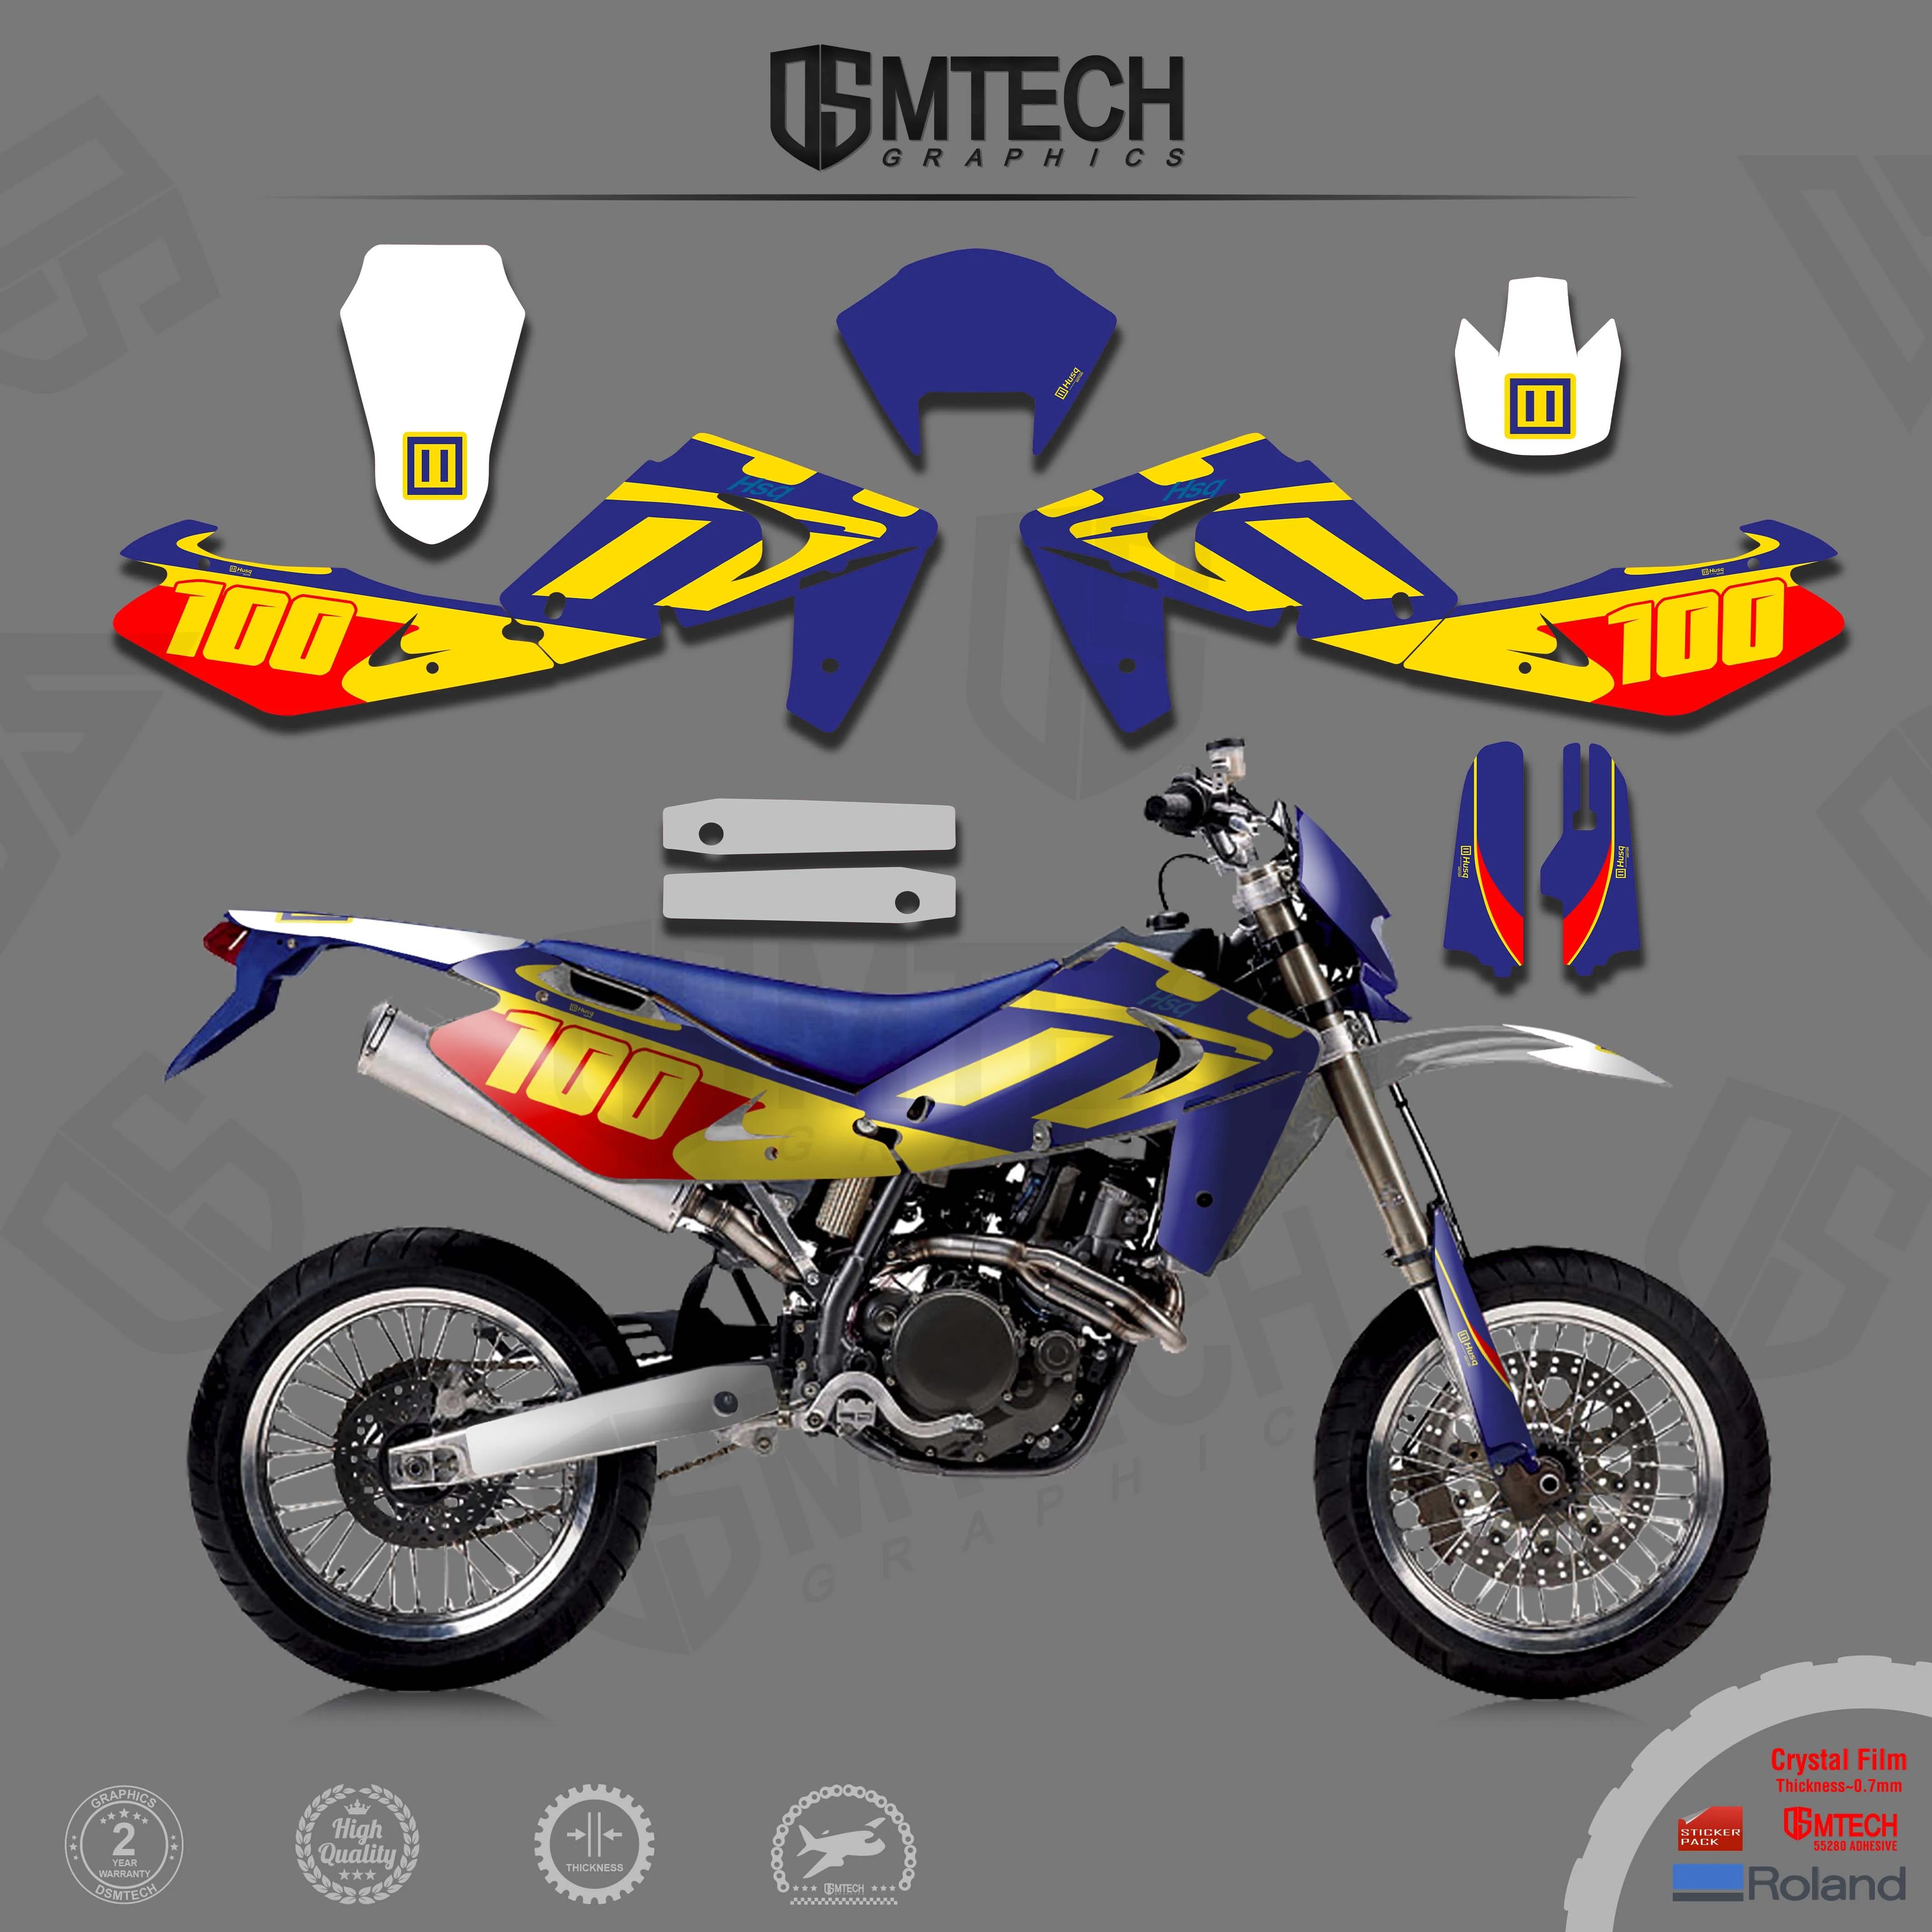 DSMTECH team combination graphic decal sticker be suitable for Husqvarna 2001 2002 2003 2004 Te250 2002 2003 2004 SM450 002